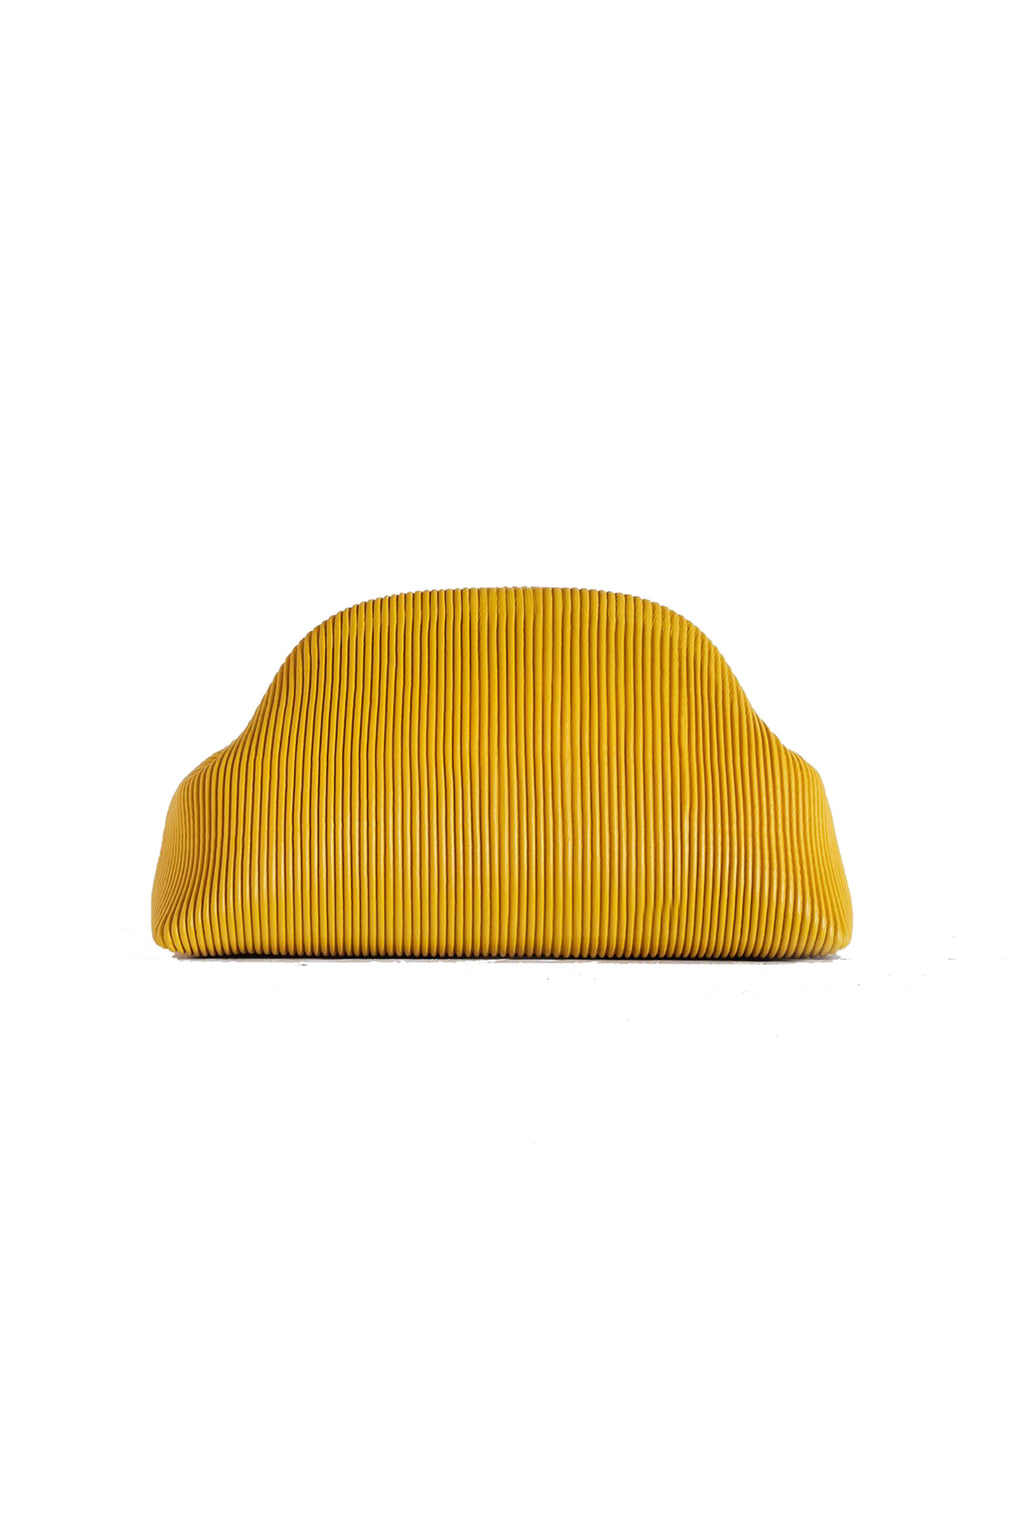 Nugget Clutch - Yellow Leather